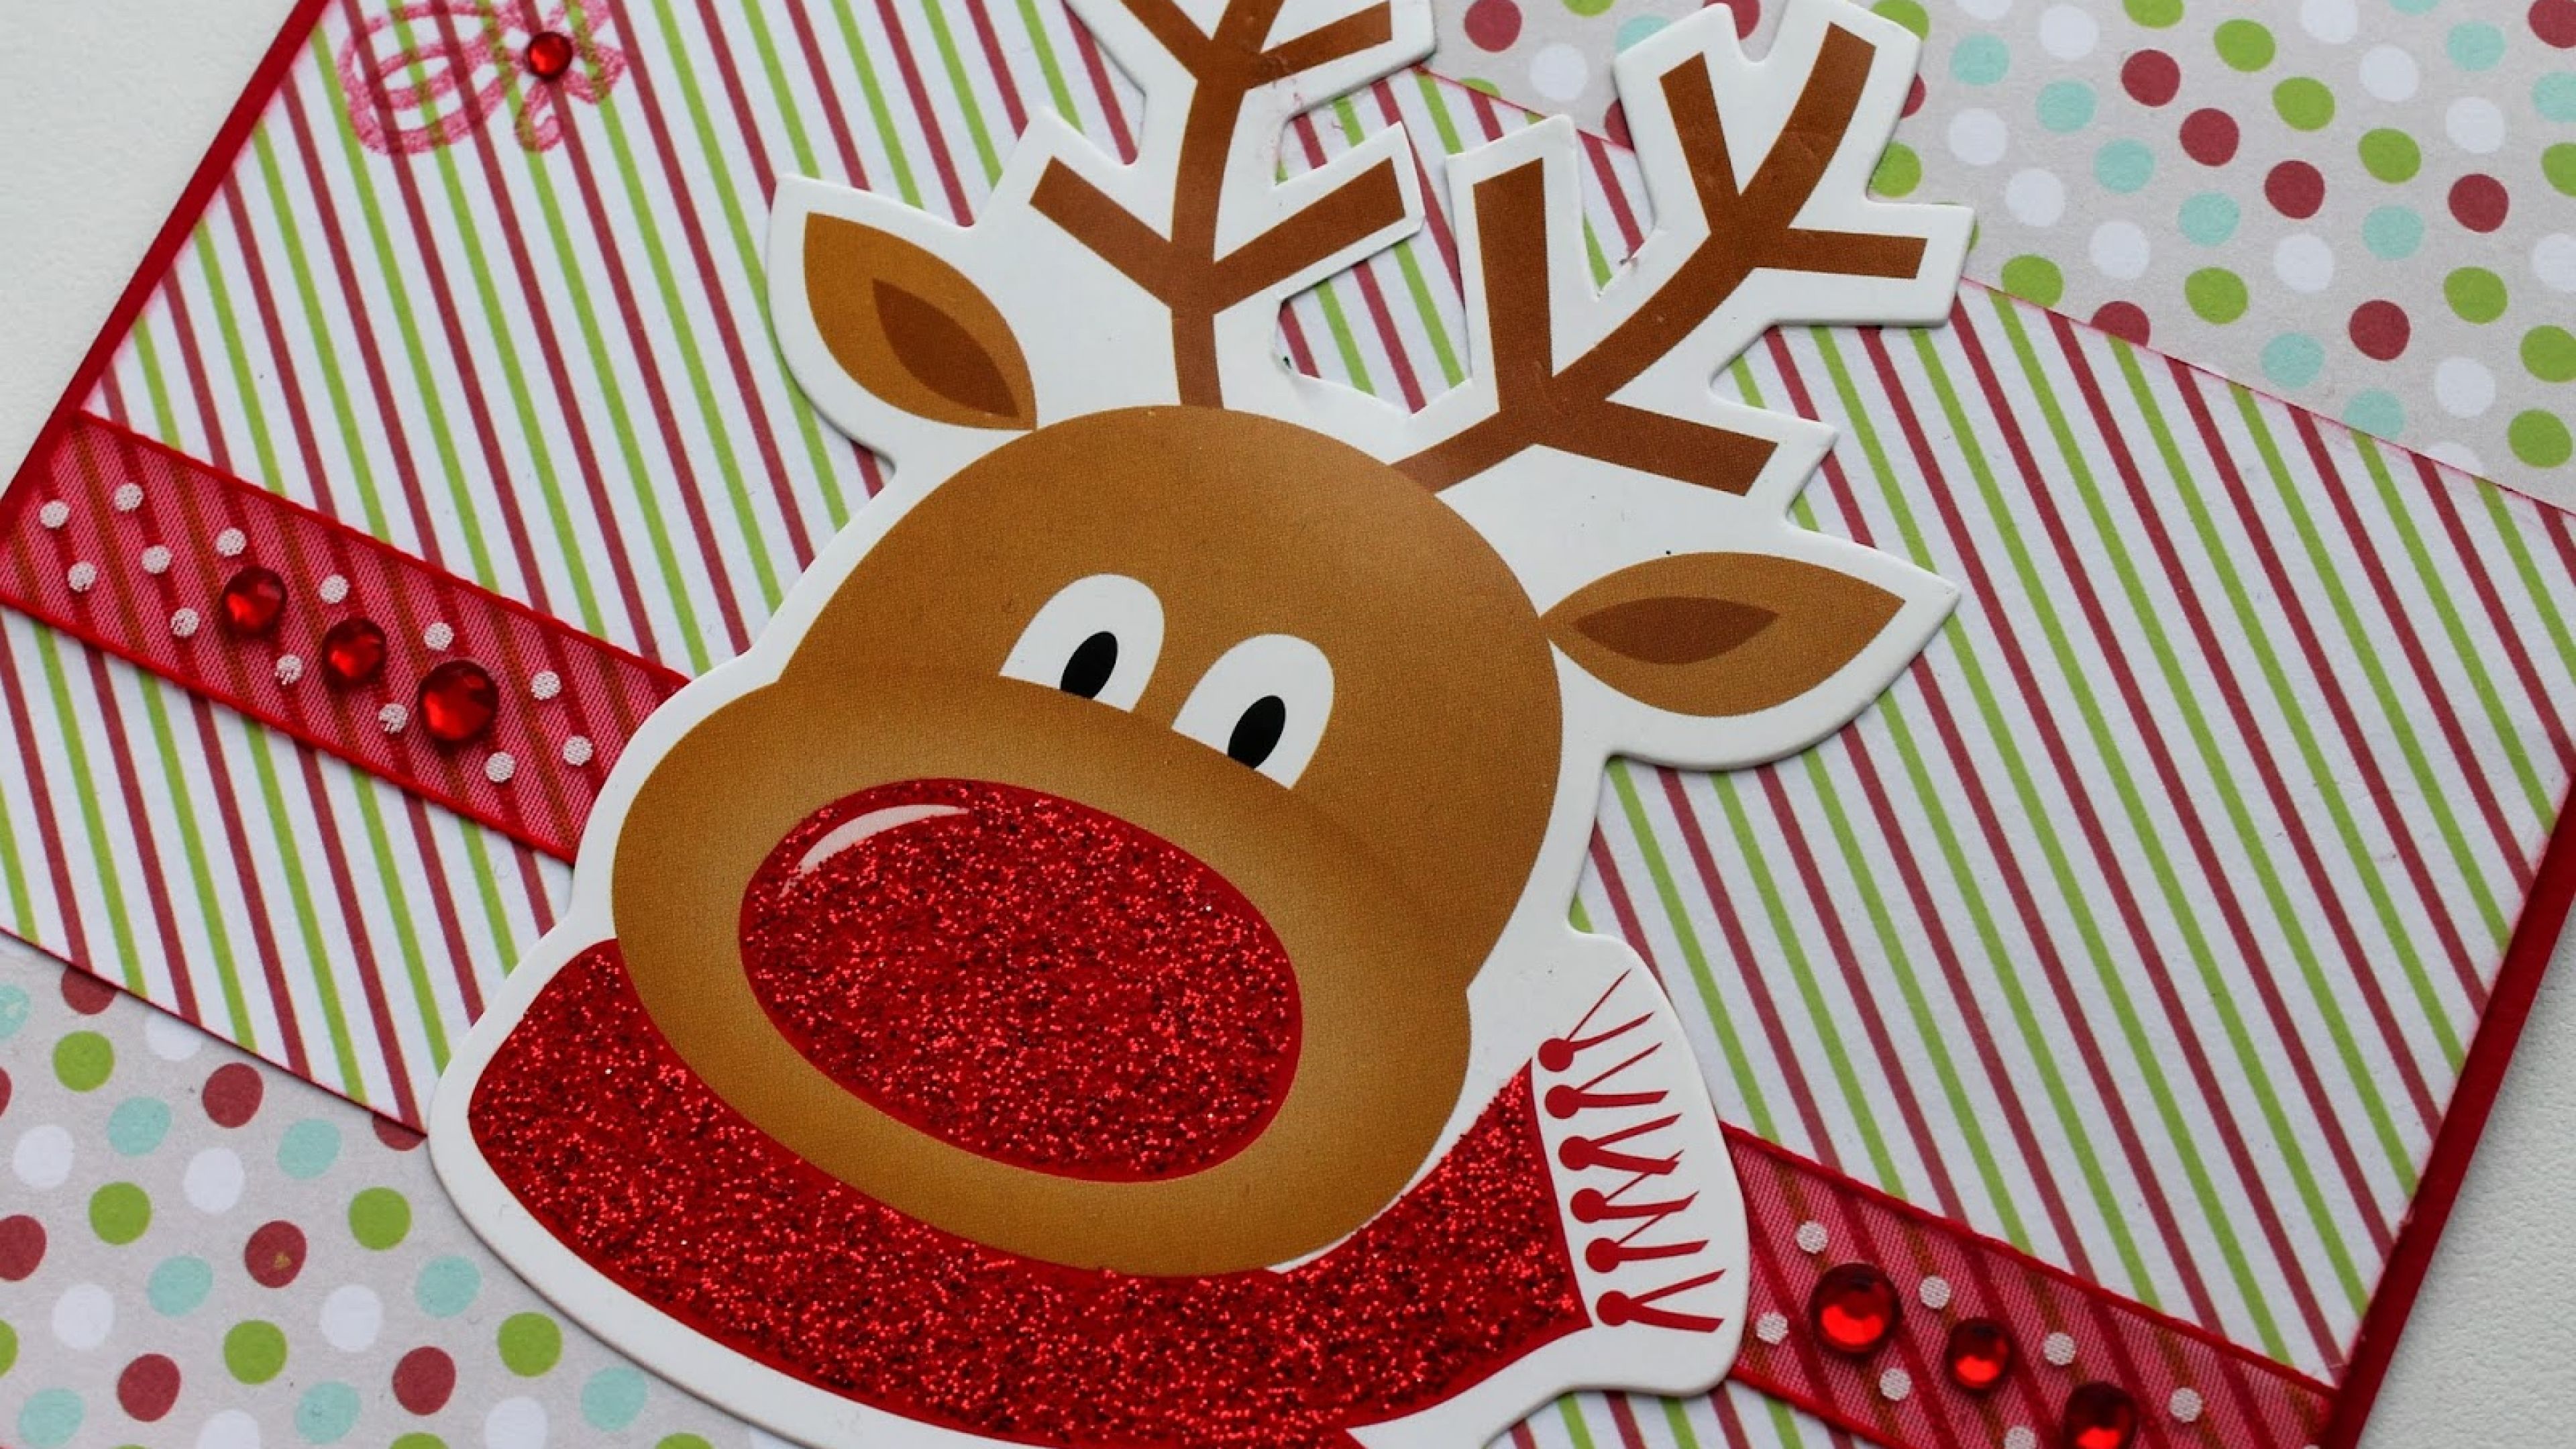 Download Wallpaper 3840x2160 Rudolph Red Nosed Reindeer, Rudolph